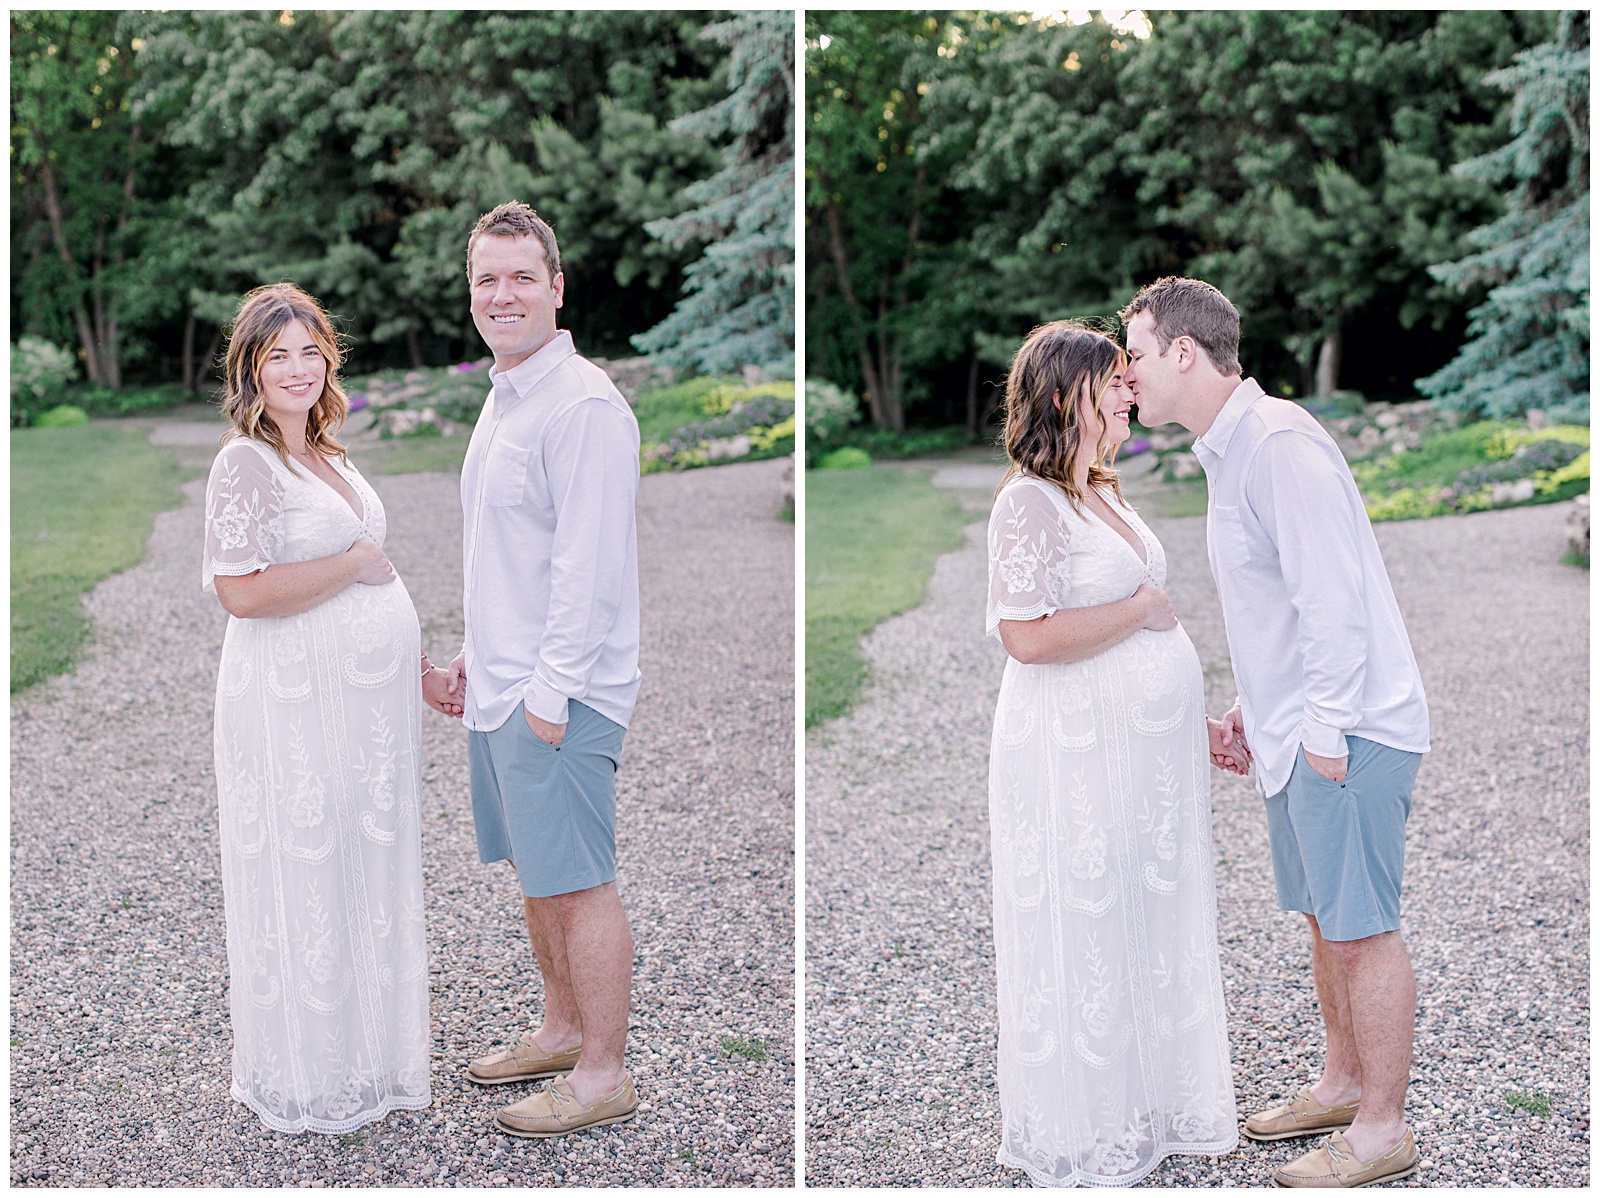 A summer maternity session at lake Harriet in Minneapolis